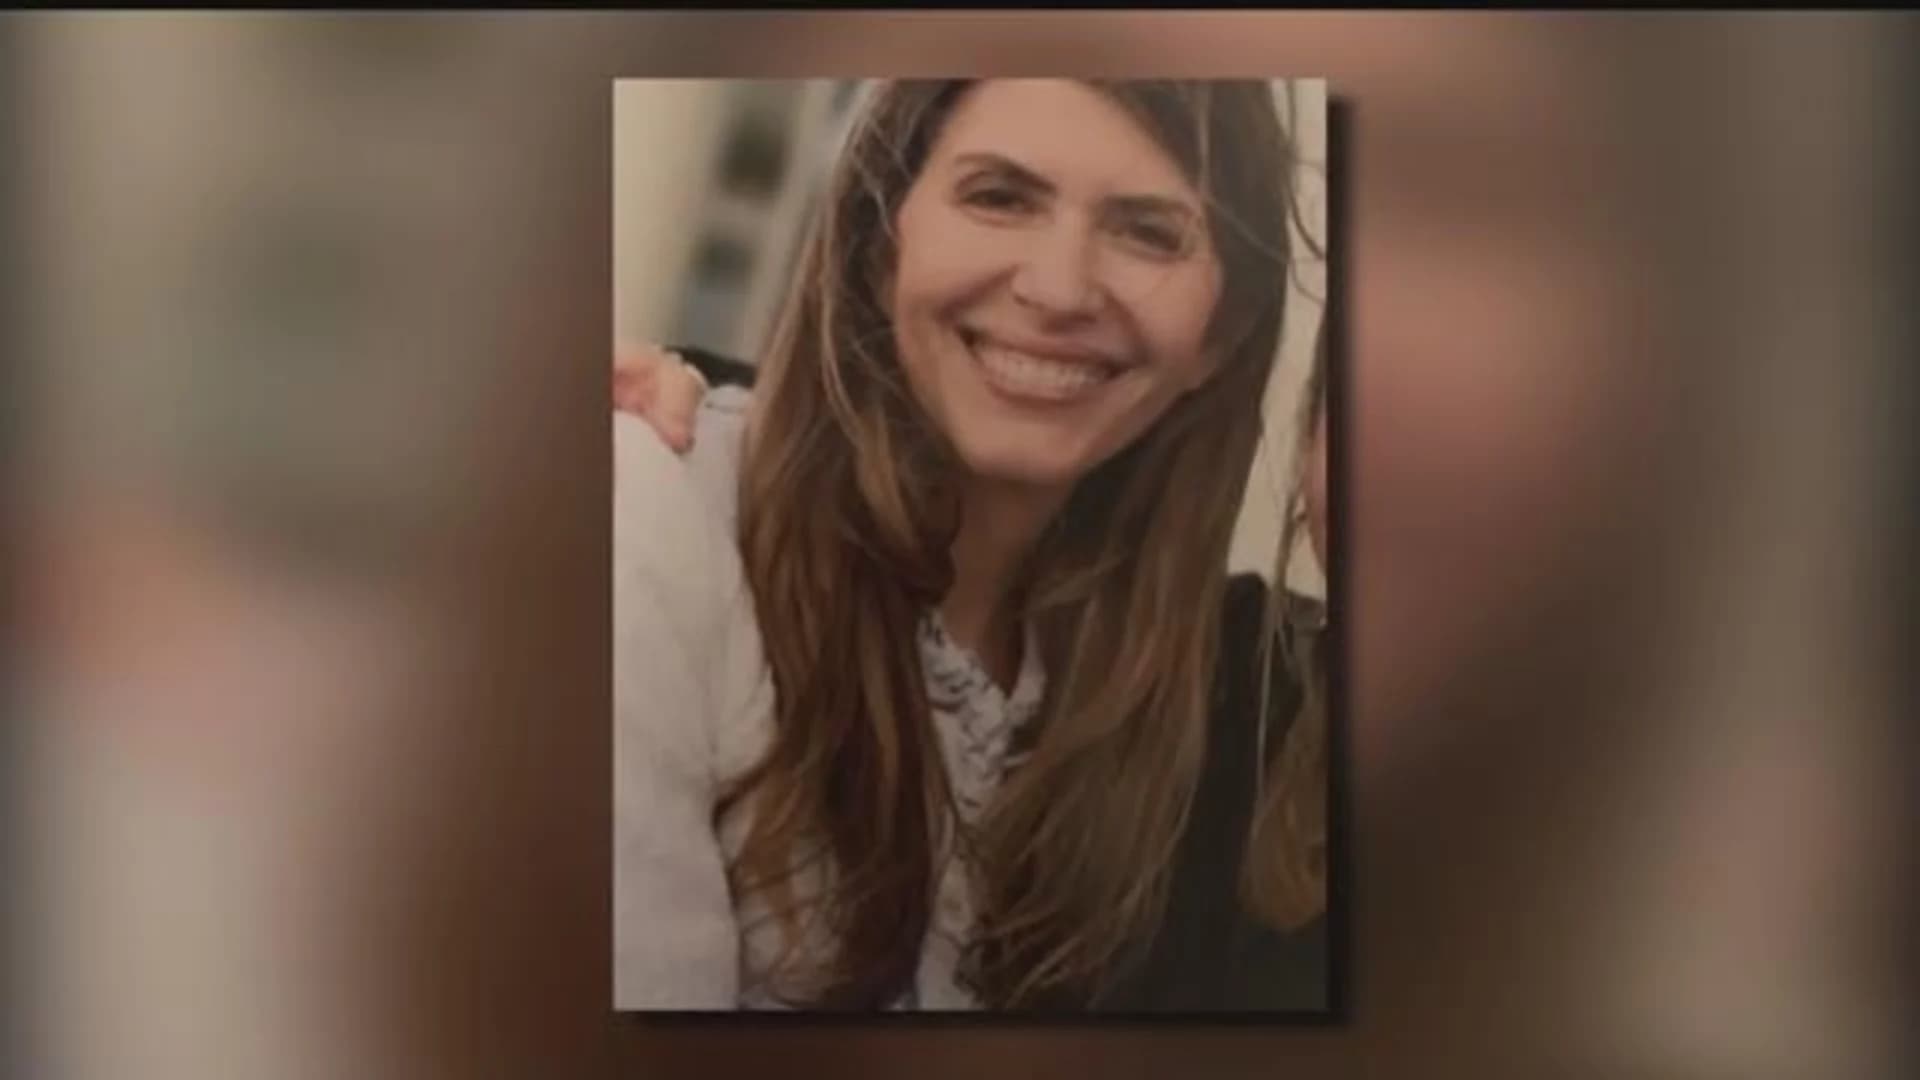 Search for missing New Canaan mother reaches two weeks